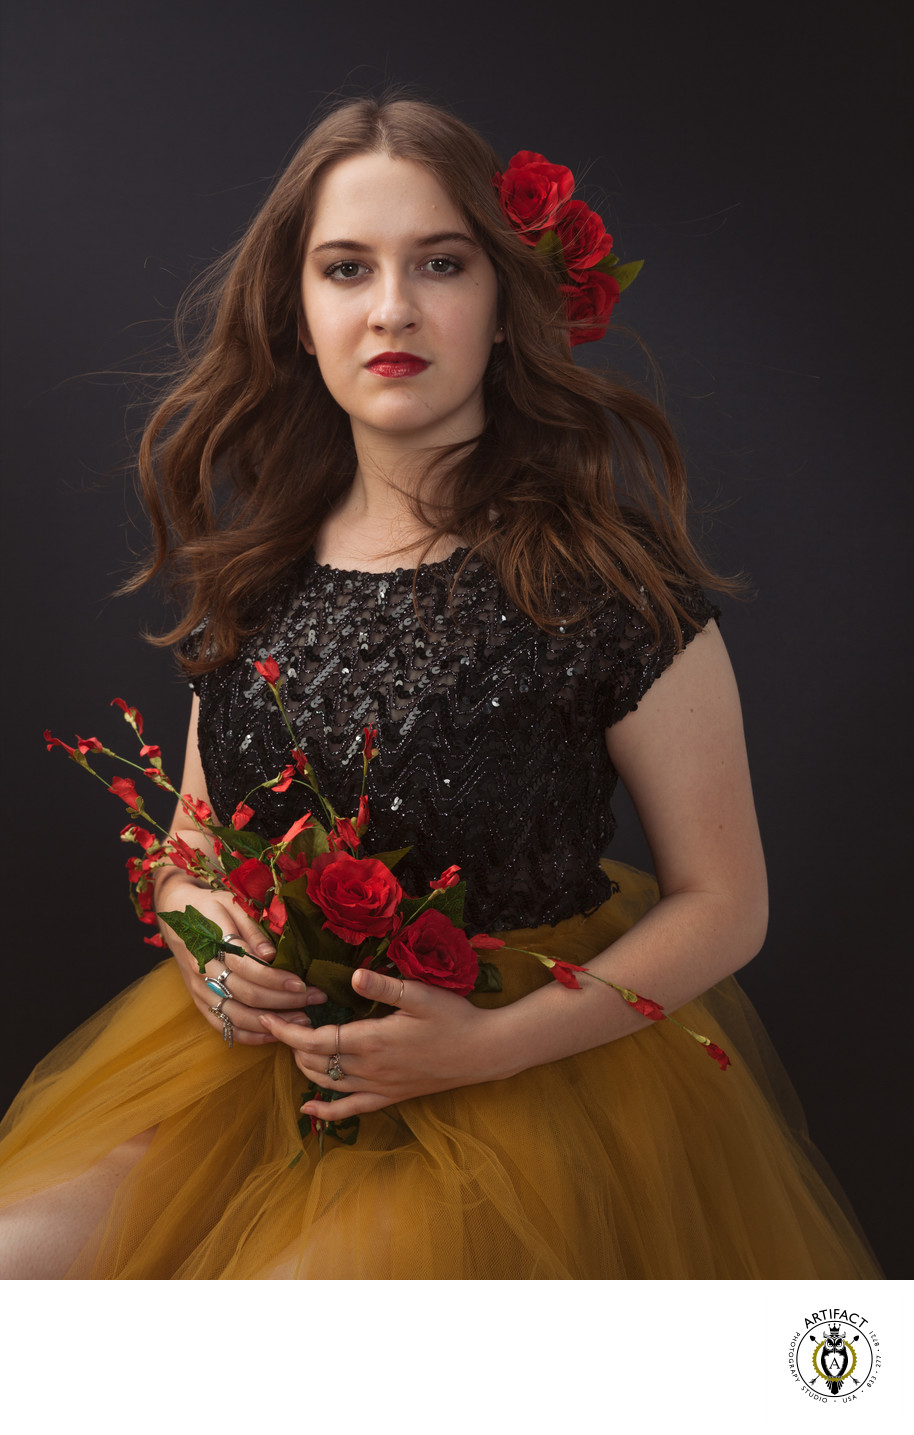 Glamour Portrait with Red Roses | Lily